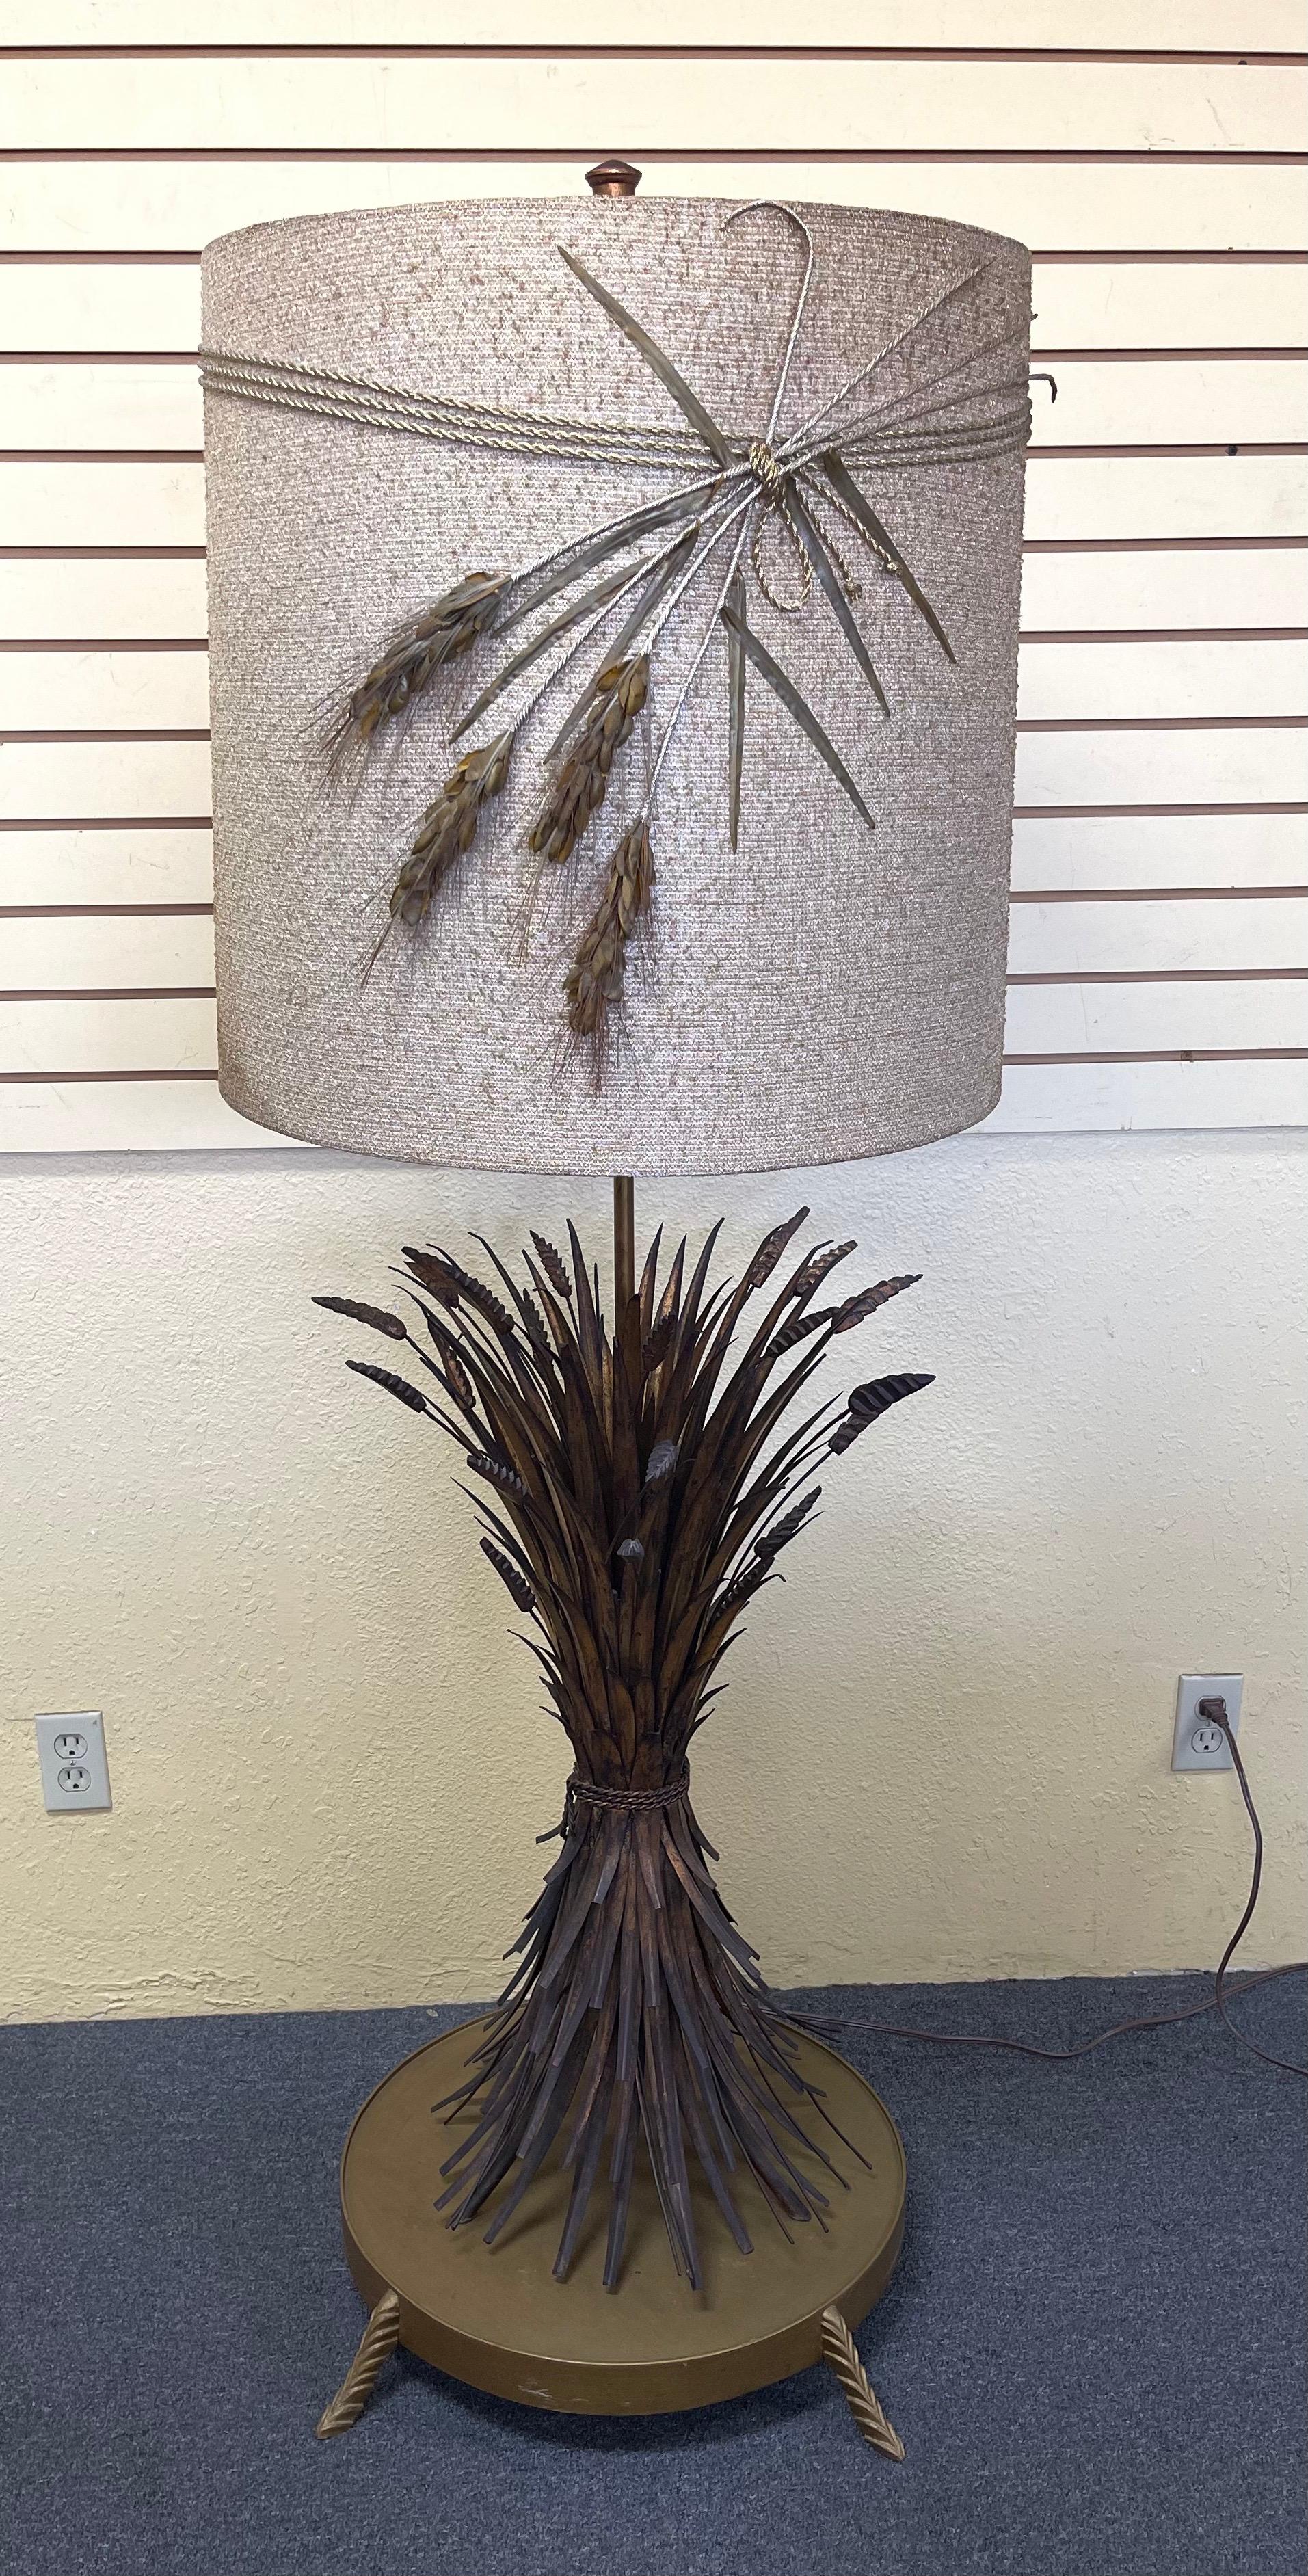 Very stylish gold gilt sheaf of wheat Italian floor lamp with original shade circa, 1950s. The floor version of this iconic sheaf of wheat deign lamp is quite rare and the fact that it has the original shade makes it even more desireable! The lamp